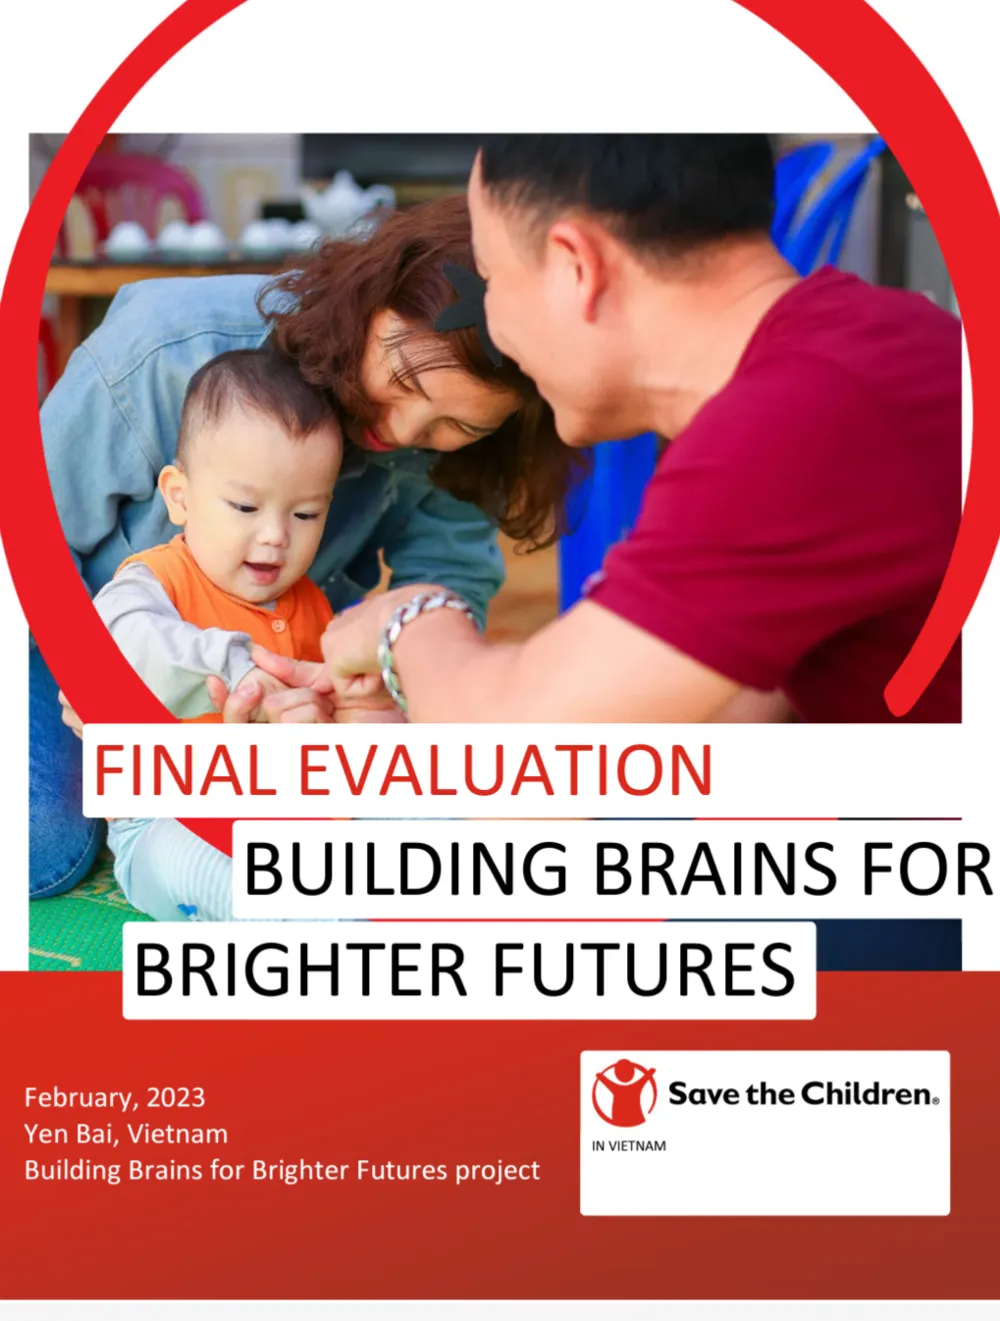 Final Evaluation of the Building Brains for Brighter Futures Project